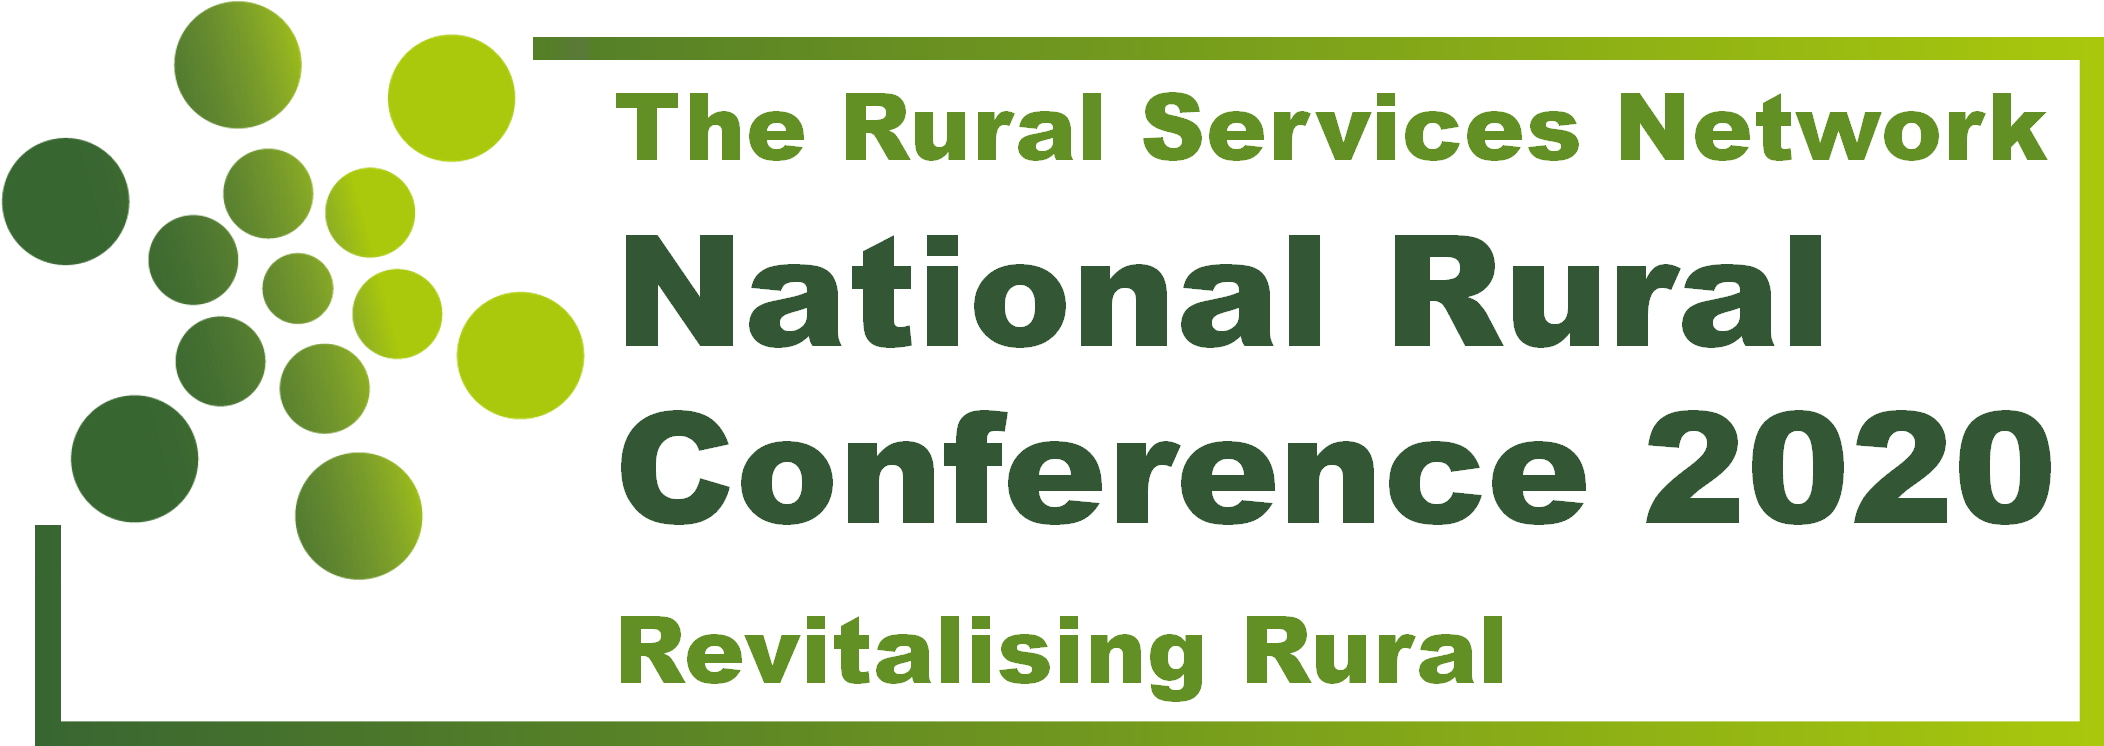 The National Rural Conference 2020 Rural Services Network